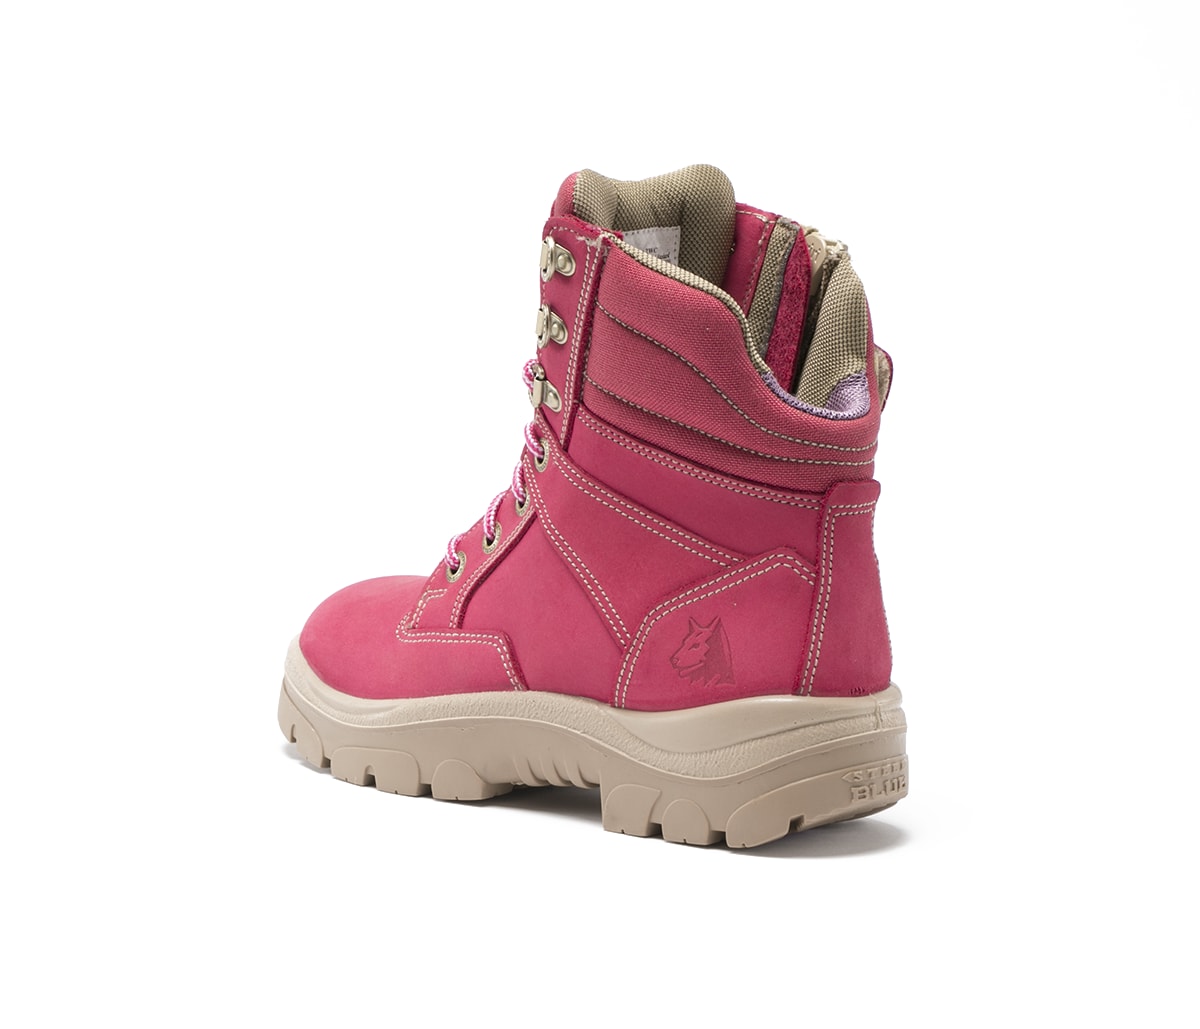 Southern Cross® Zip Ladies Boots - Pink